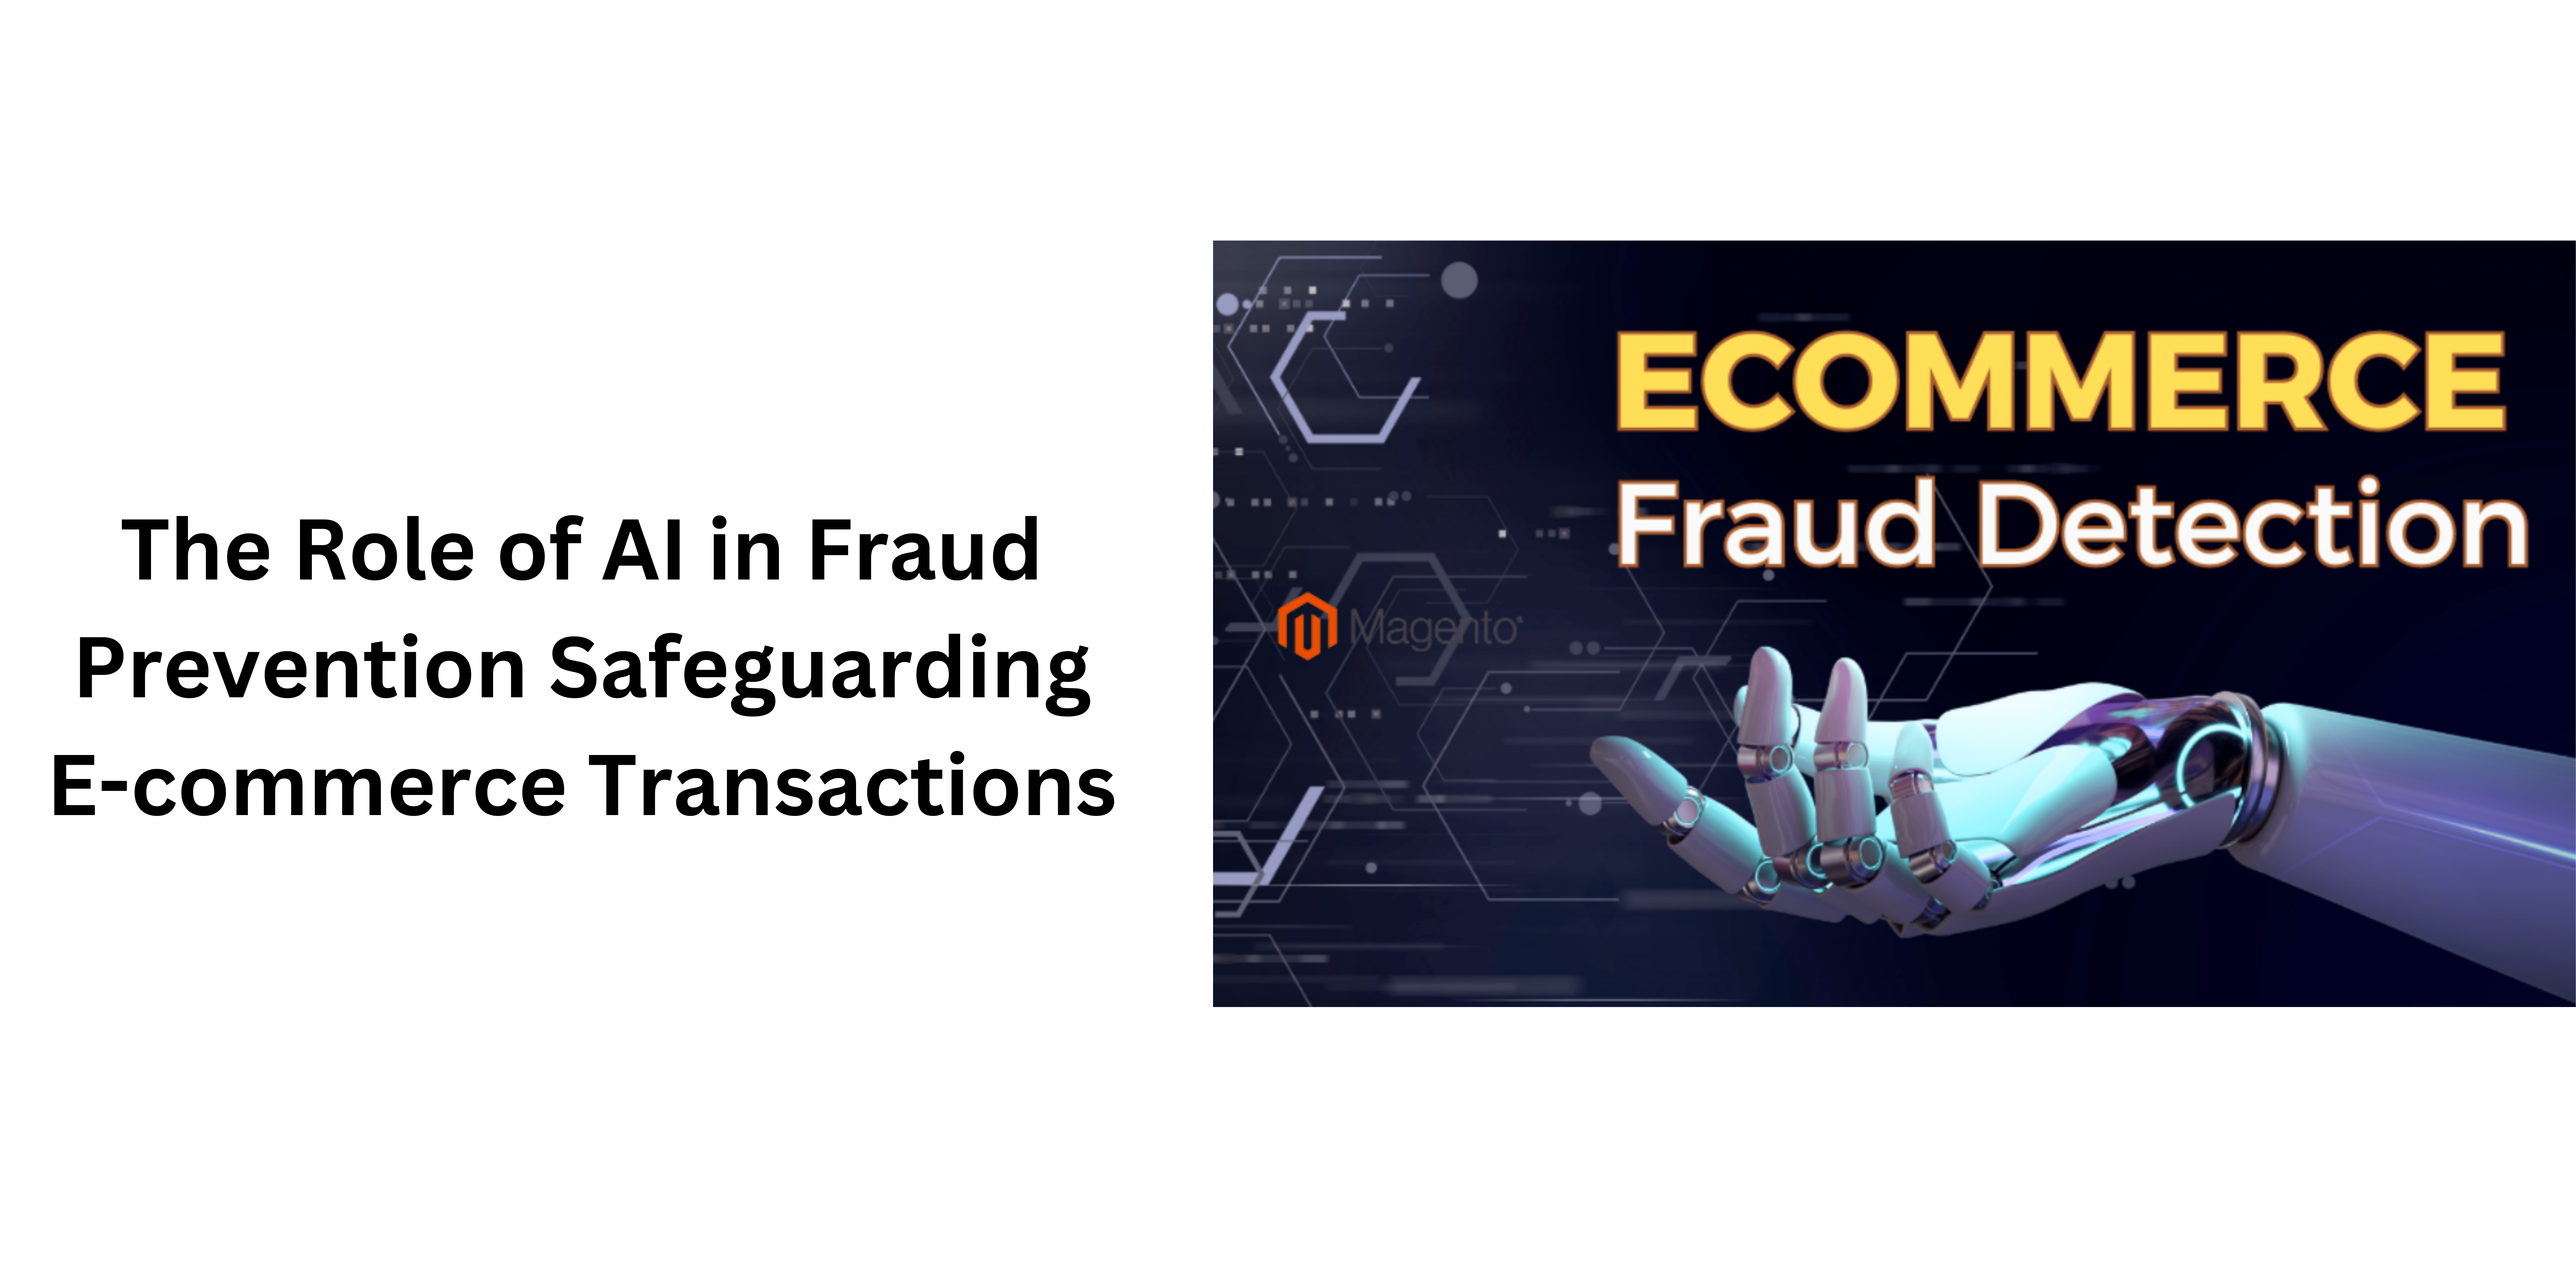 The Role of AI in Fraud Prevention Safeguarding E-commerce Transactions